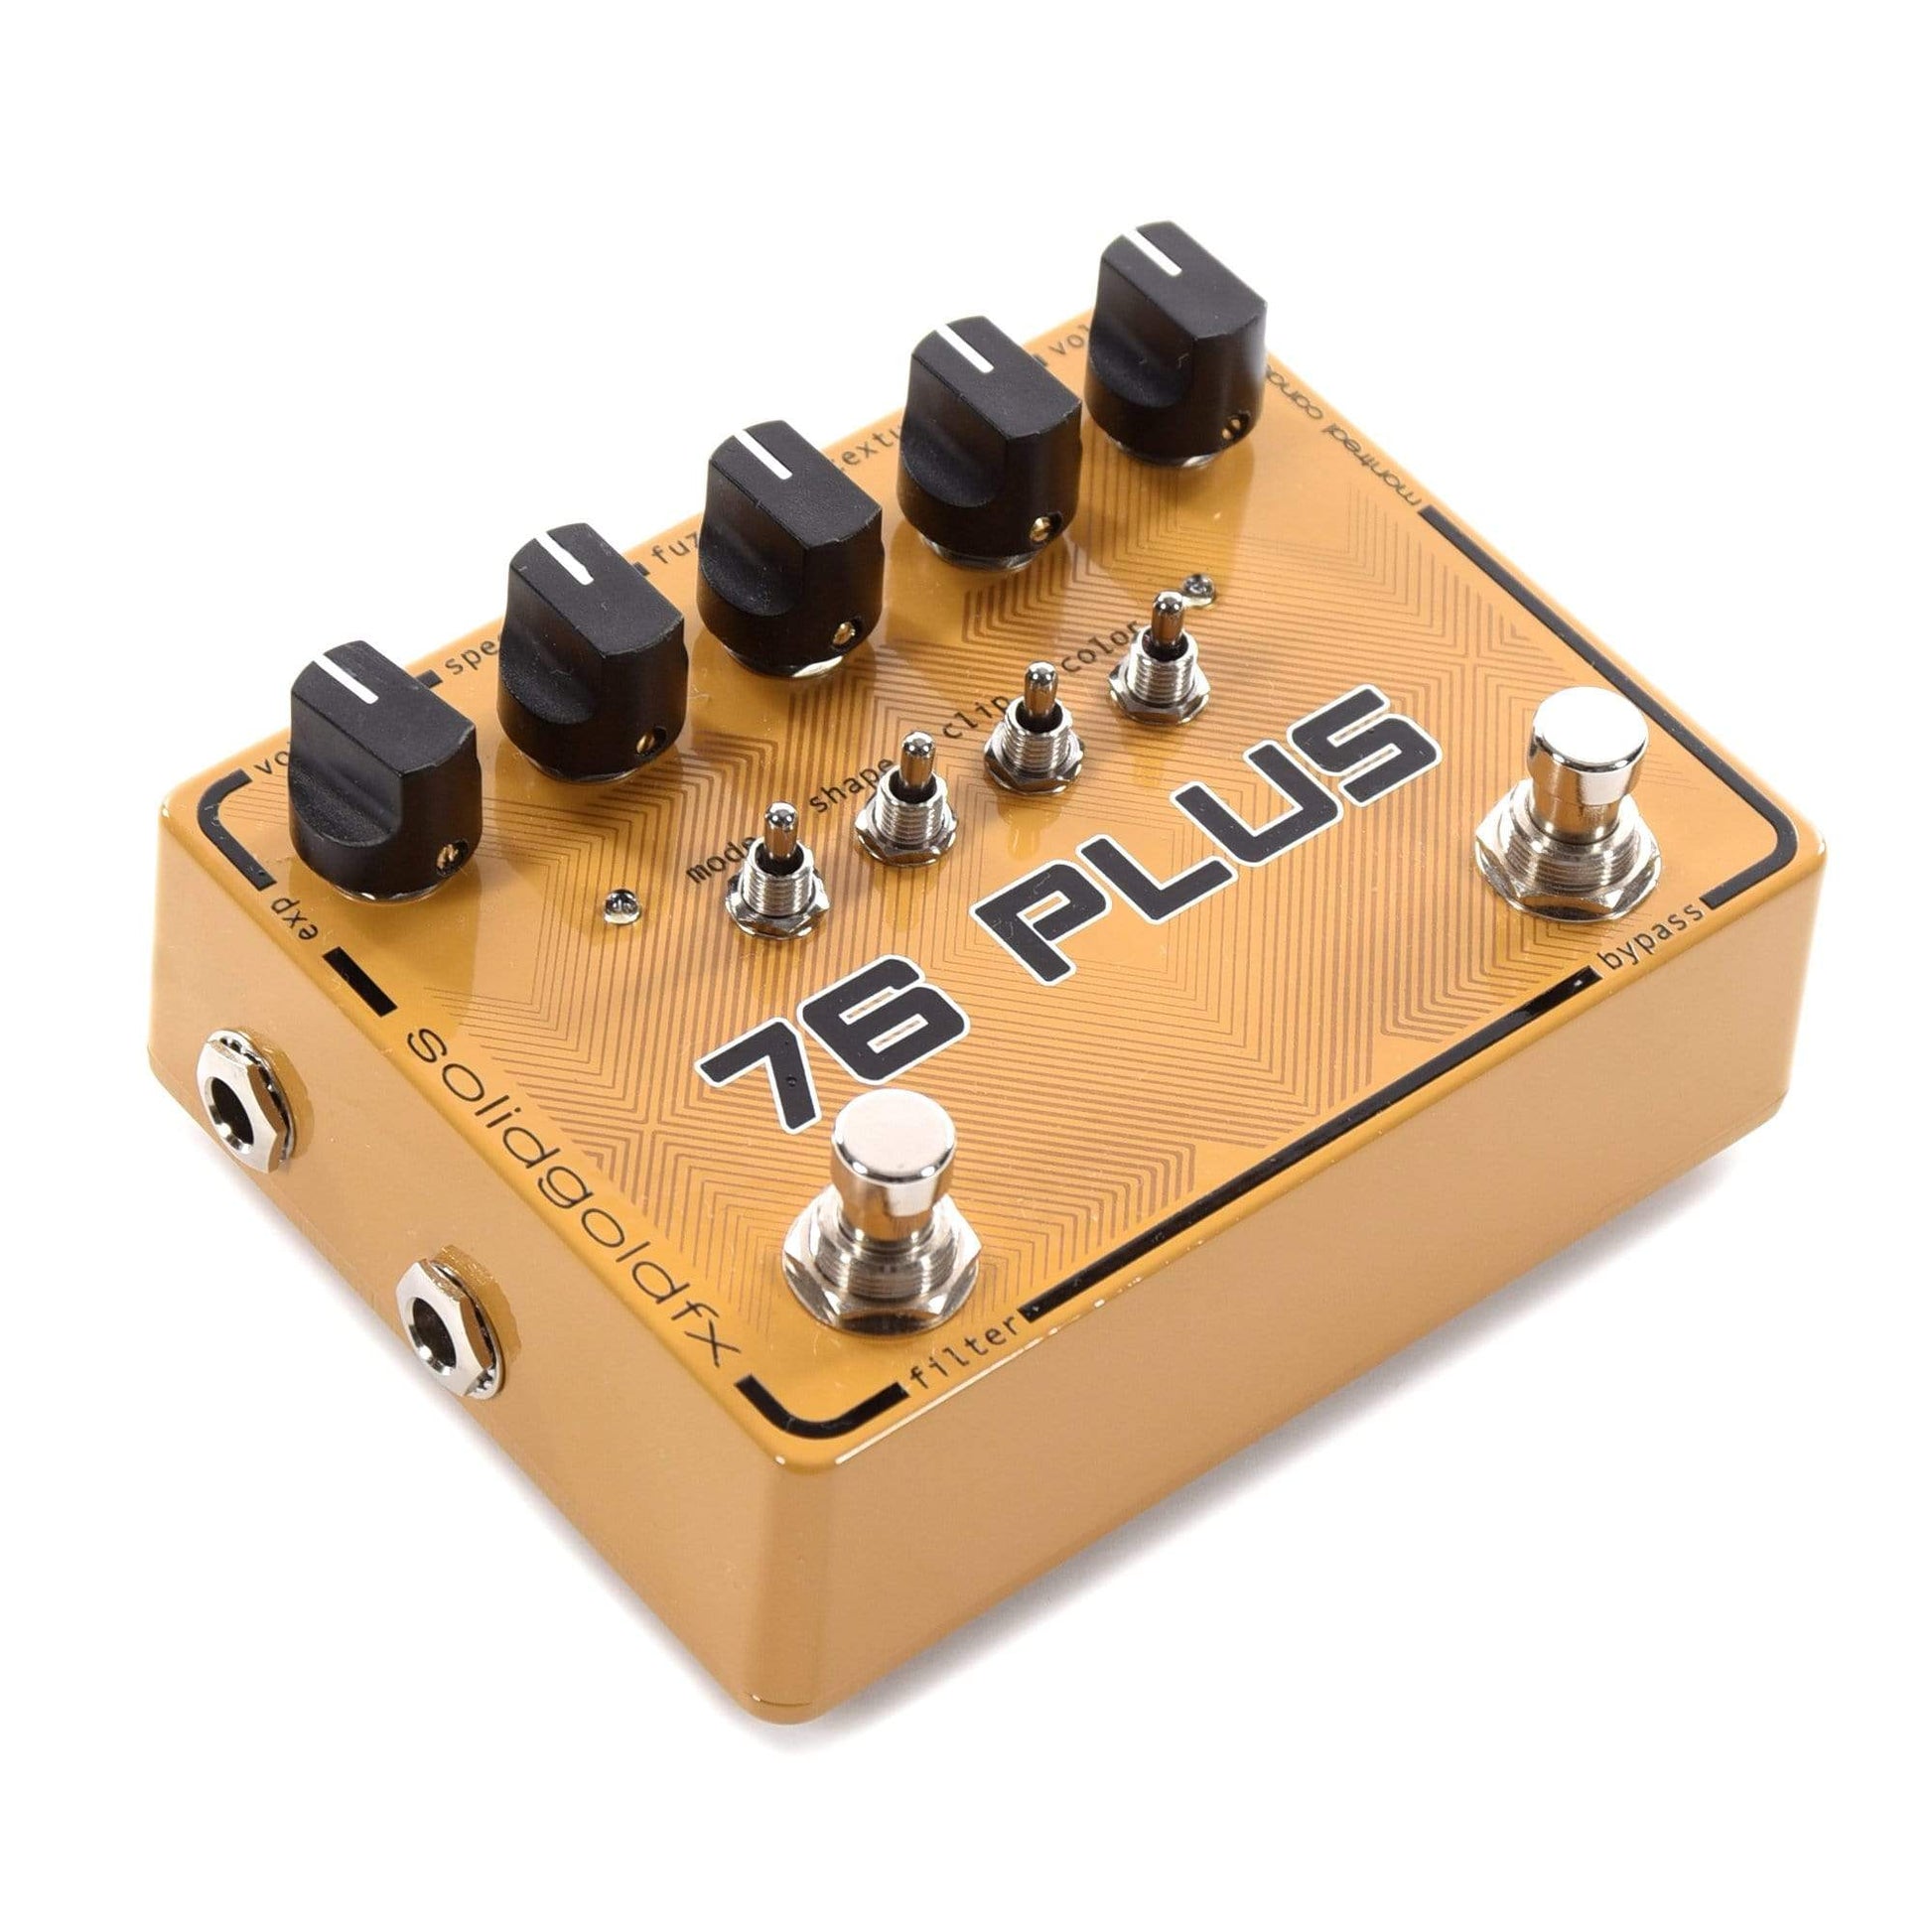 SolidGoldFX 76 Plus Octave Fuzz & LFO Filter Effects and Pedals / Fuzz